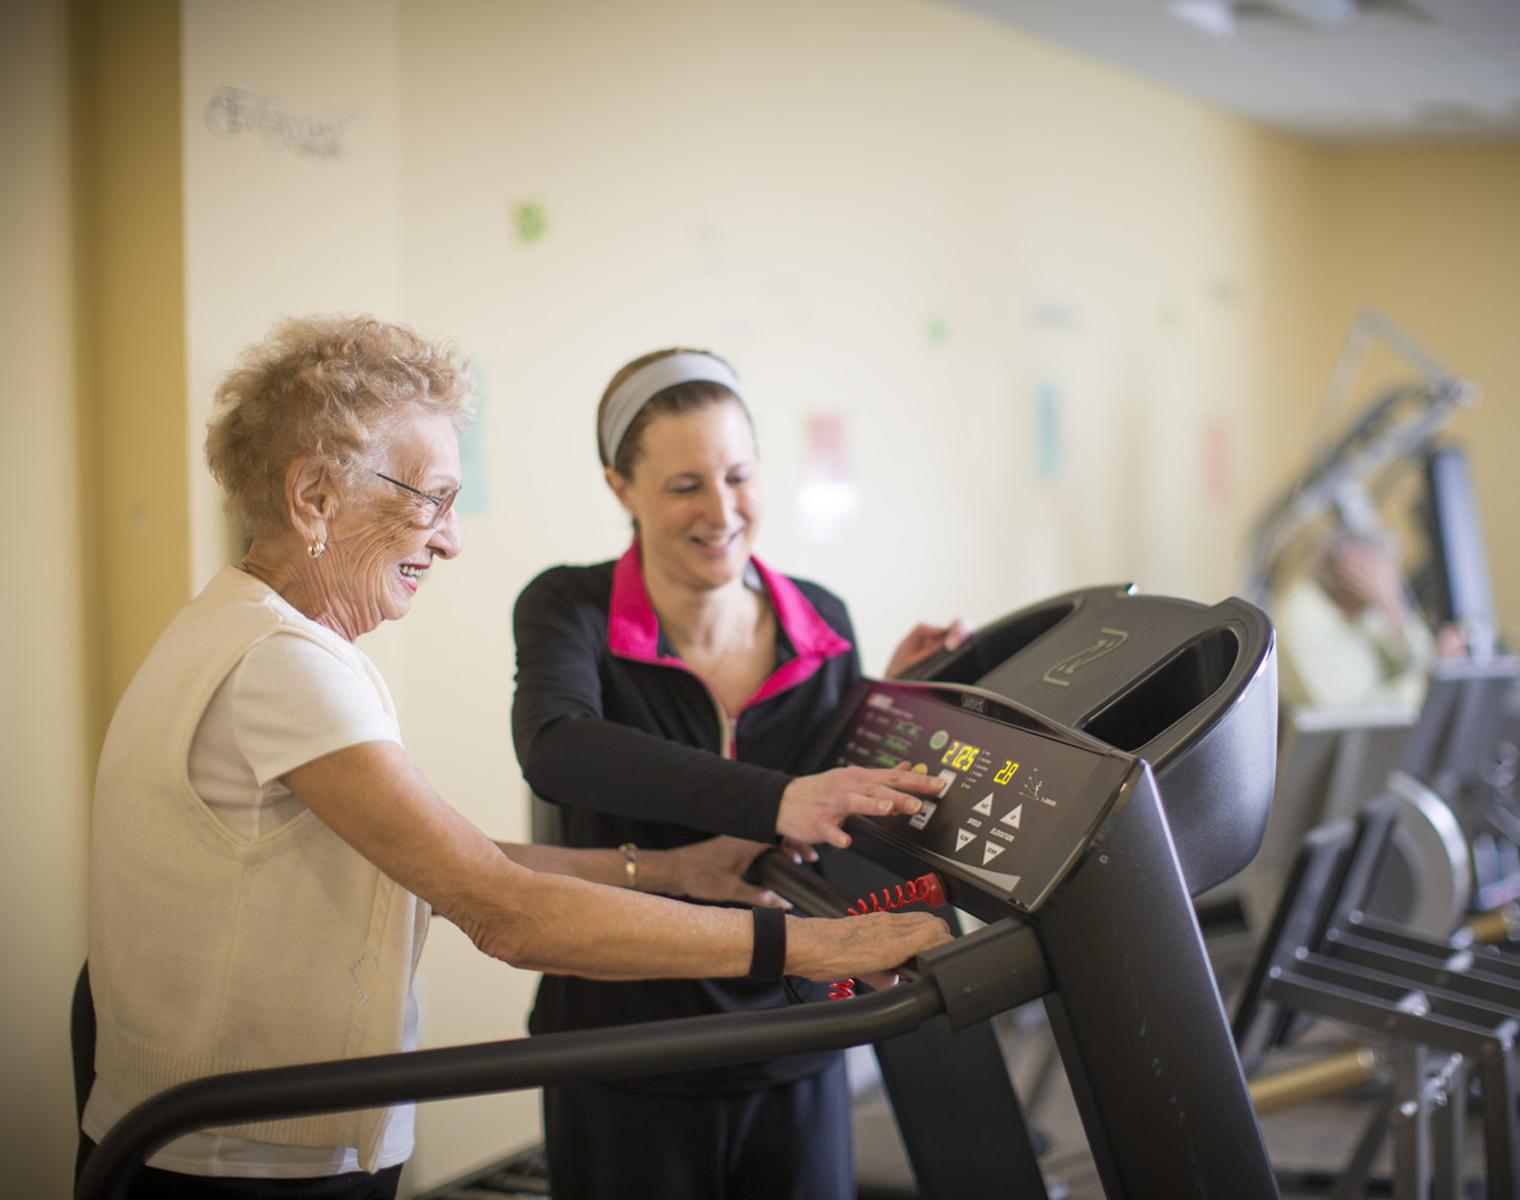 An older woman is walking on a treadmill. A younger woman in workout clothes stands next to her, changing the display on the treadmill. They are both smiling.